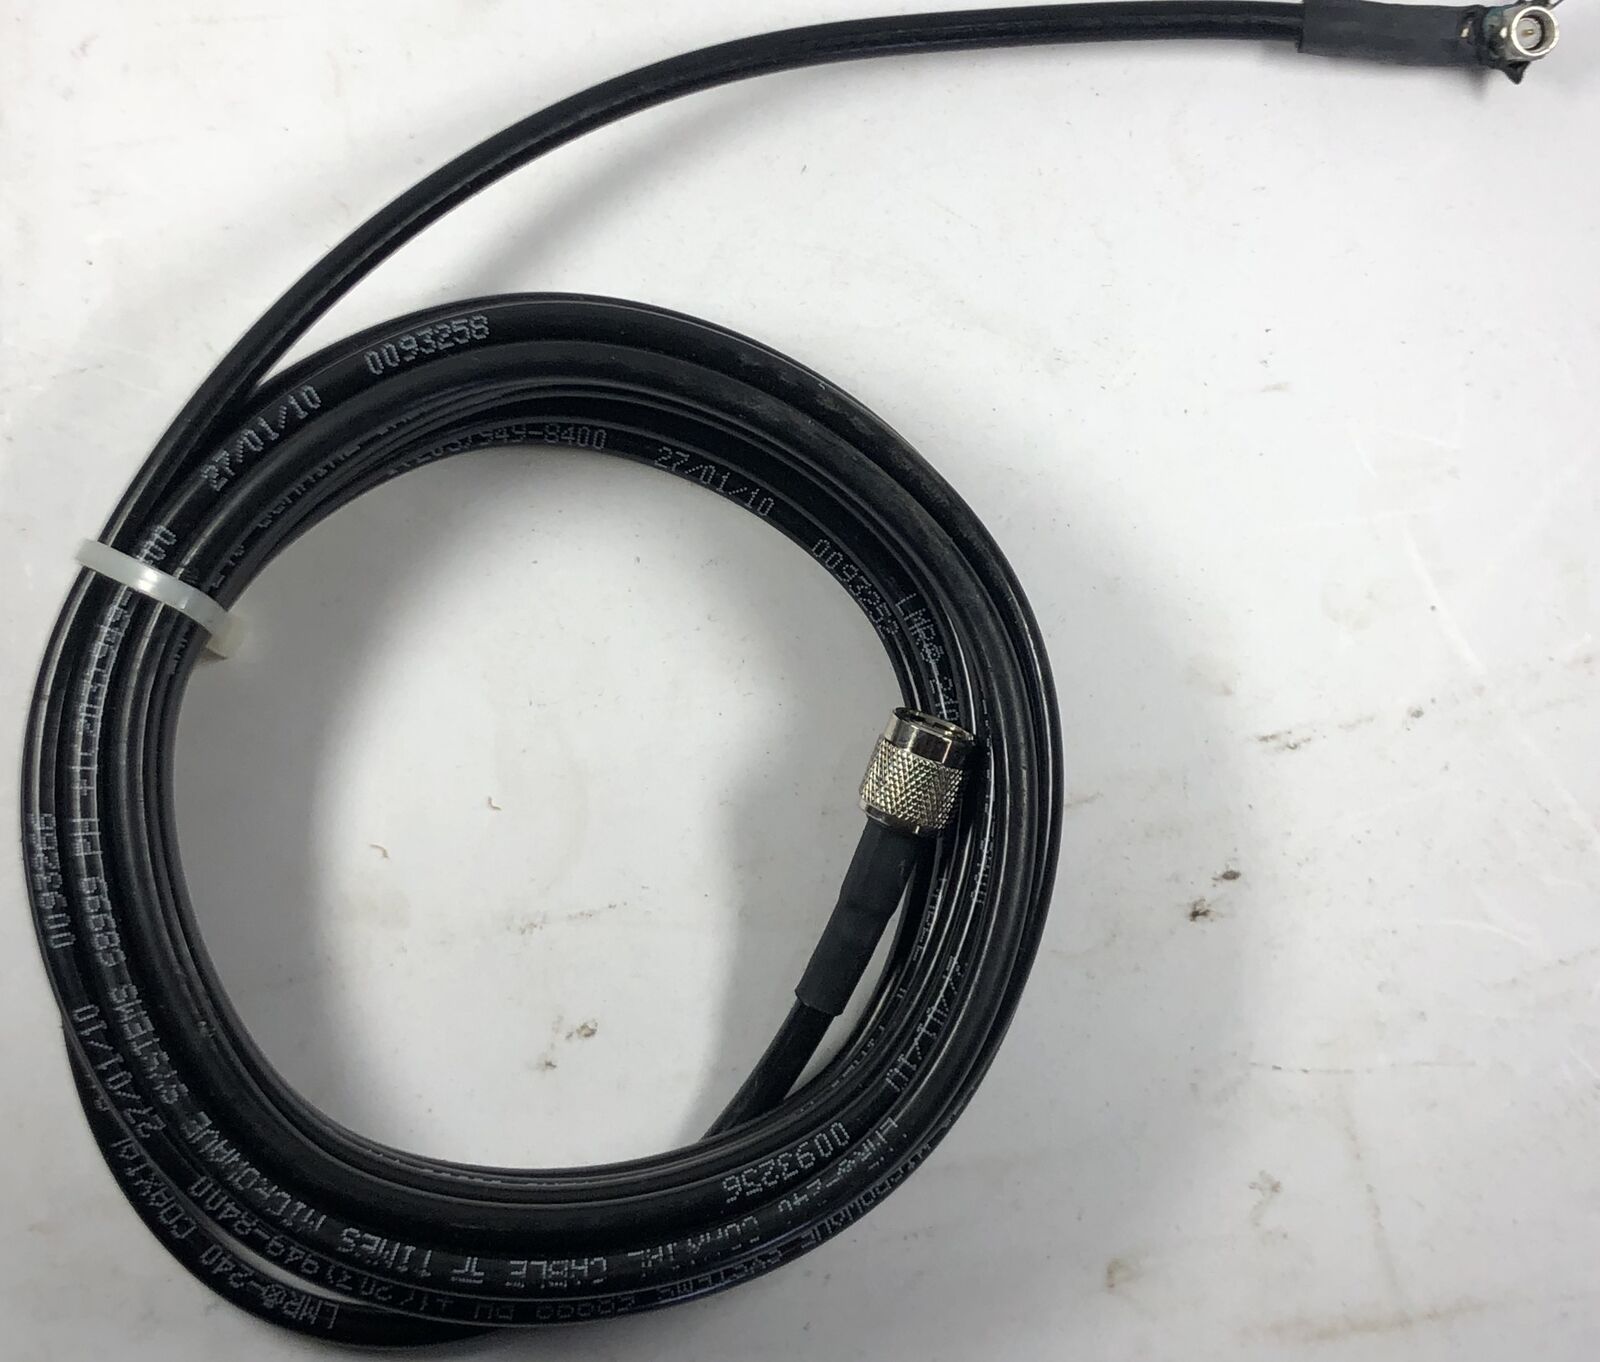 Times Microwave Systems LMR-240 16' Coaxial Cable